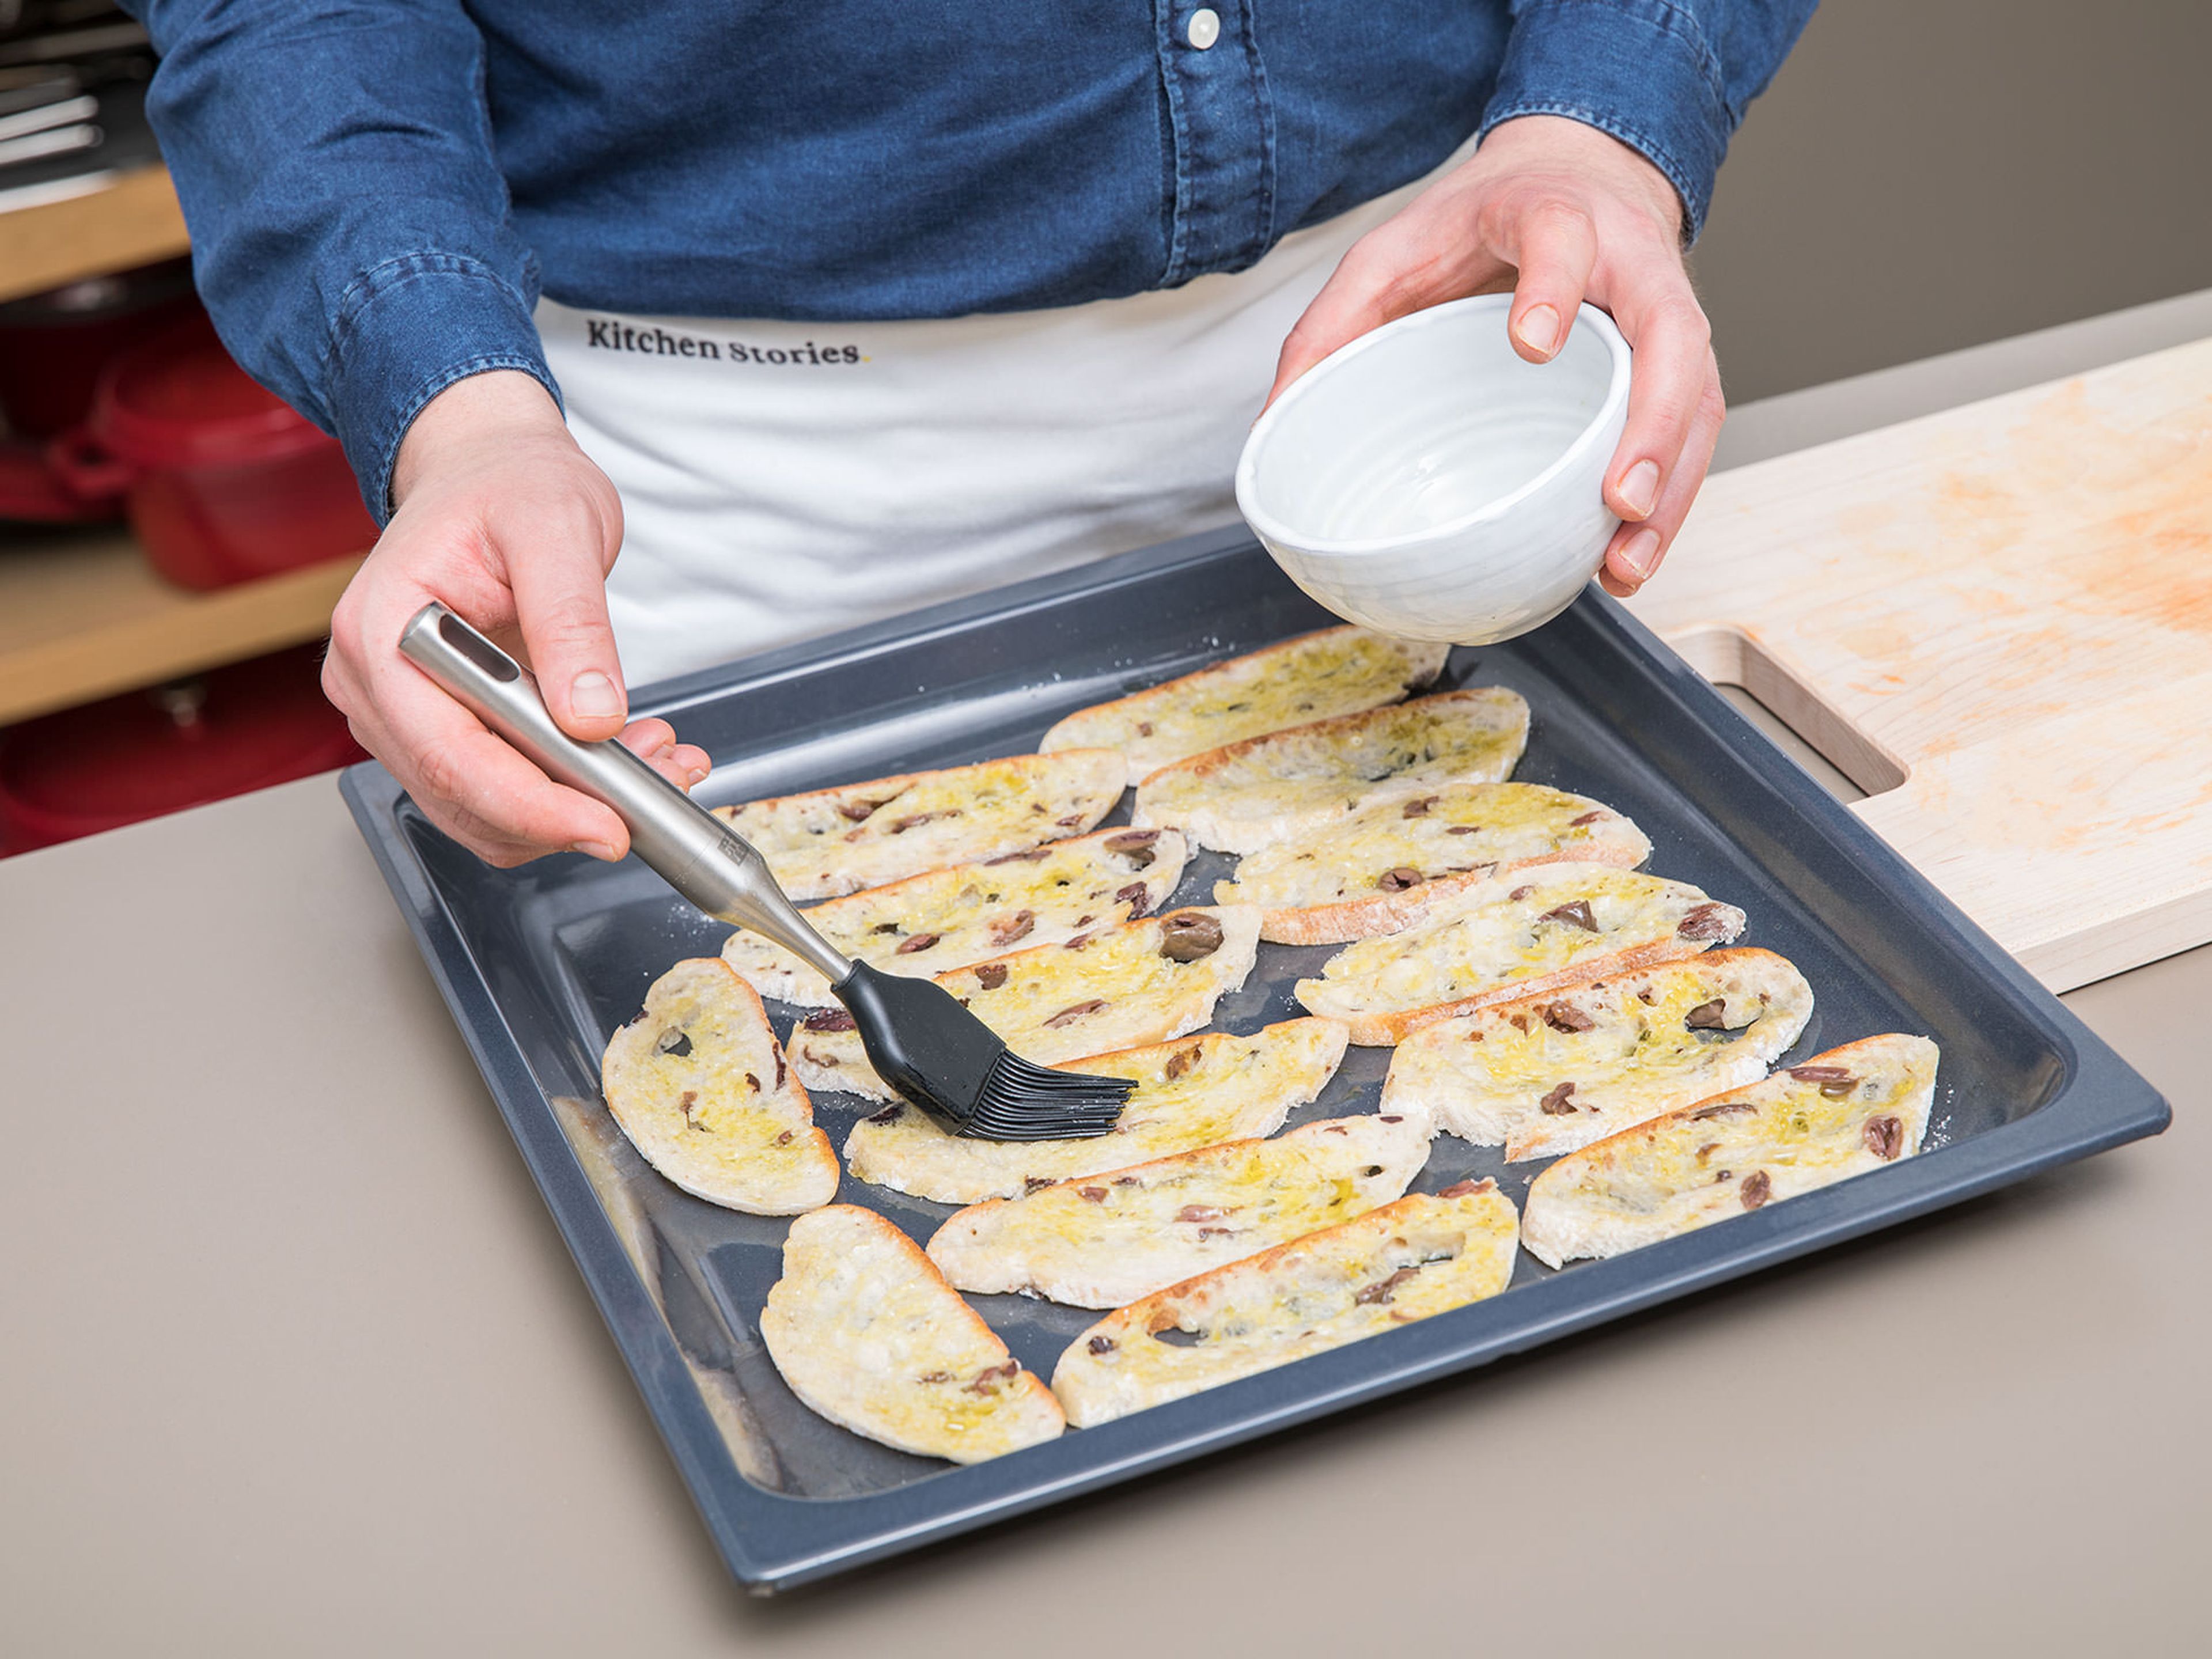 Slice ciabatta bread into thin slices and place on a parchment-lined baking sheet. Brush each side with remaining olive oil and bake for approximately 10 min. at 180°C/350°F or until golden brown and crunchy.